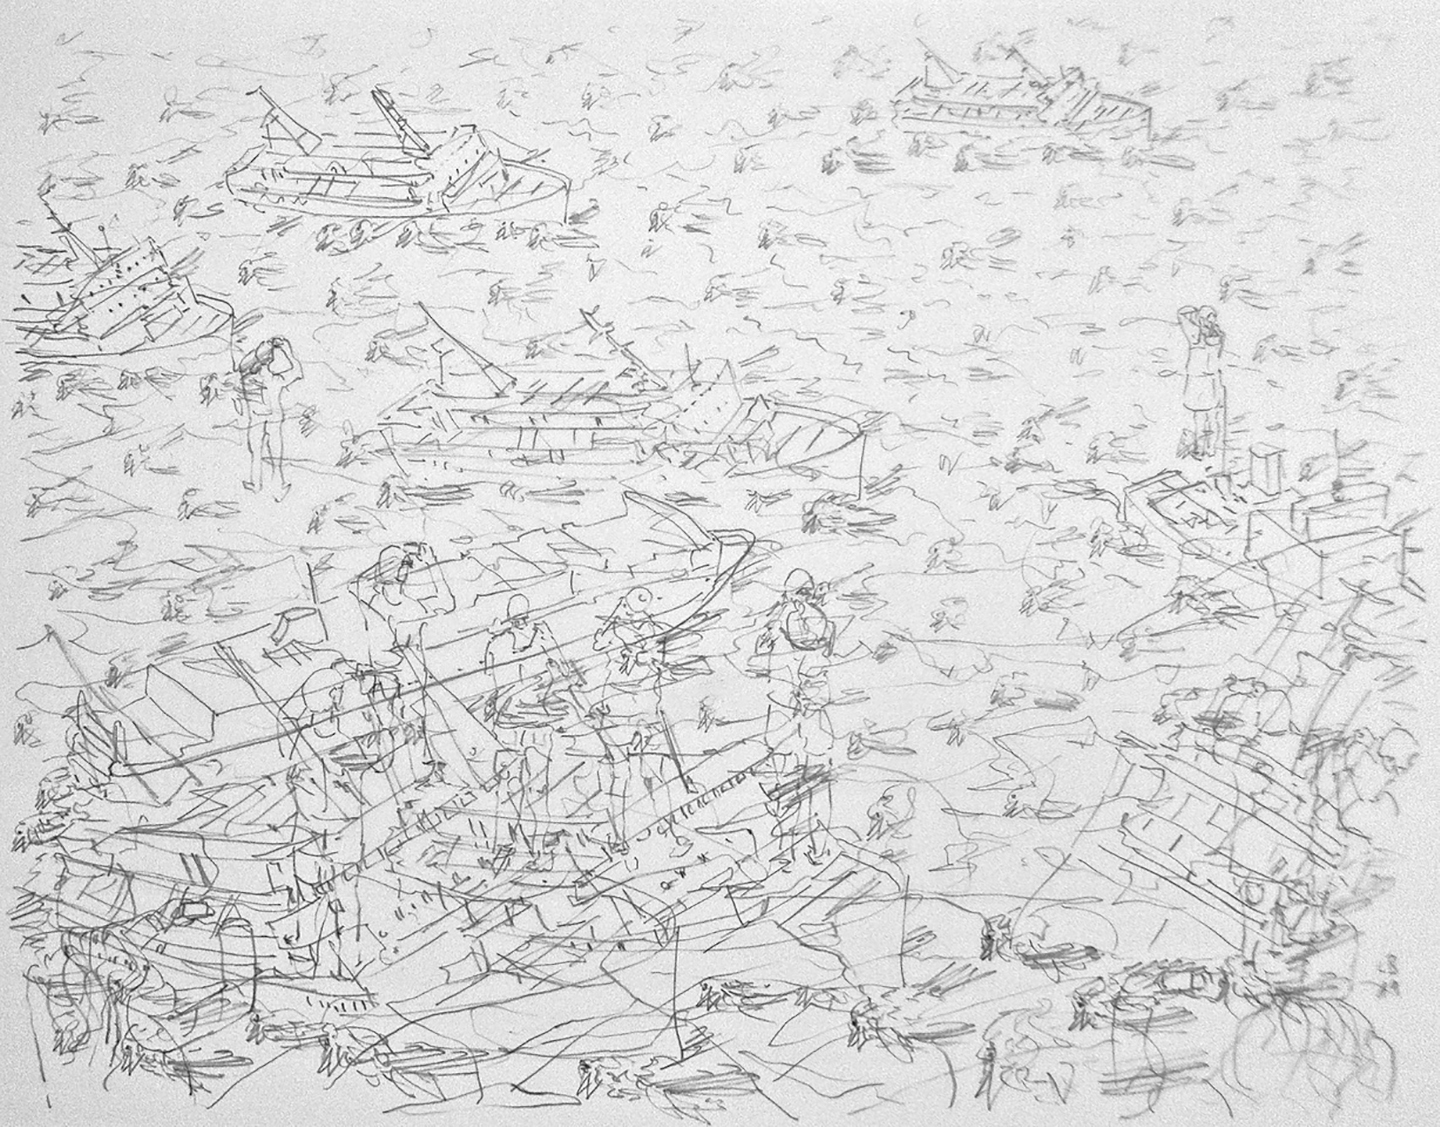 Leo Brunschwiler, sinking ships, dead redtails and tourists, pencil on polyester foil, 28 cm x 35 cm , 2019